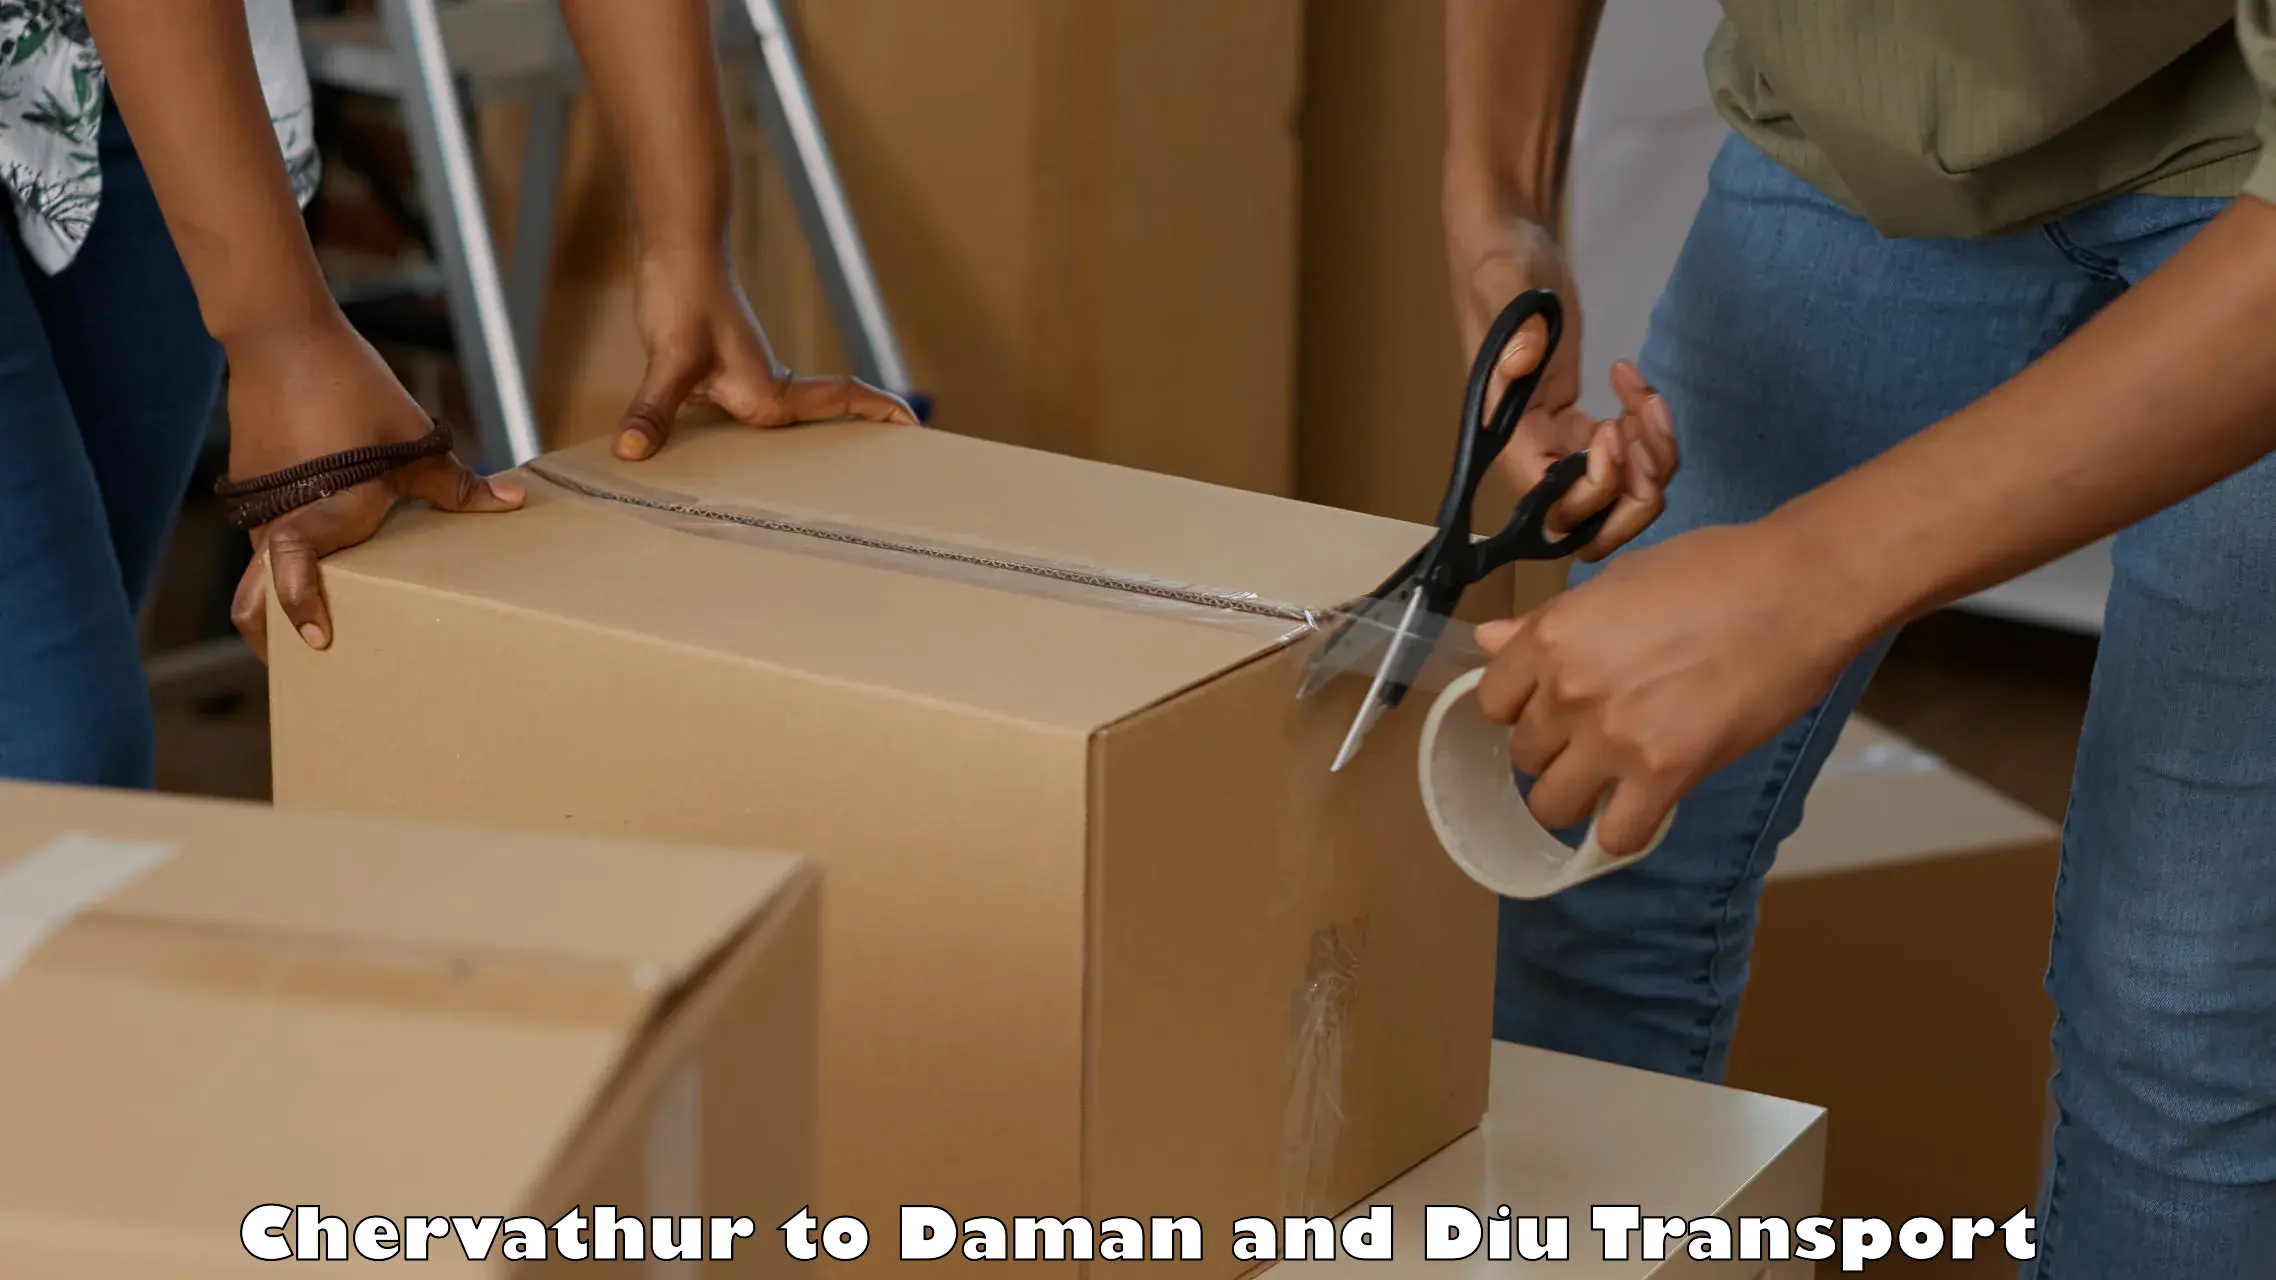 Delivery service Chervathur to Daman and Diu